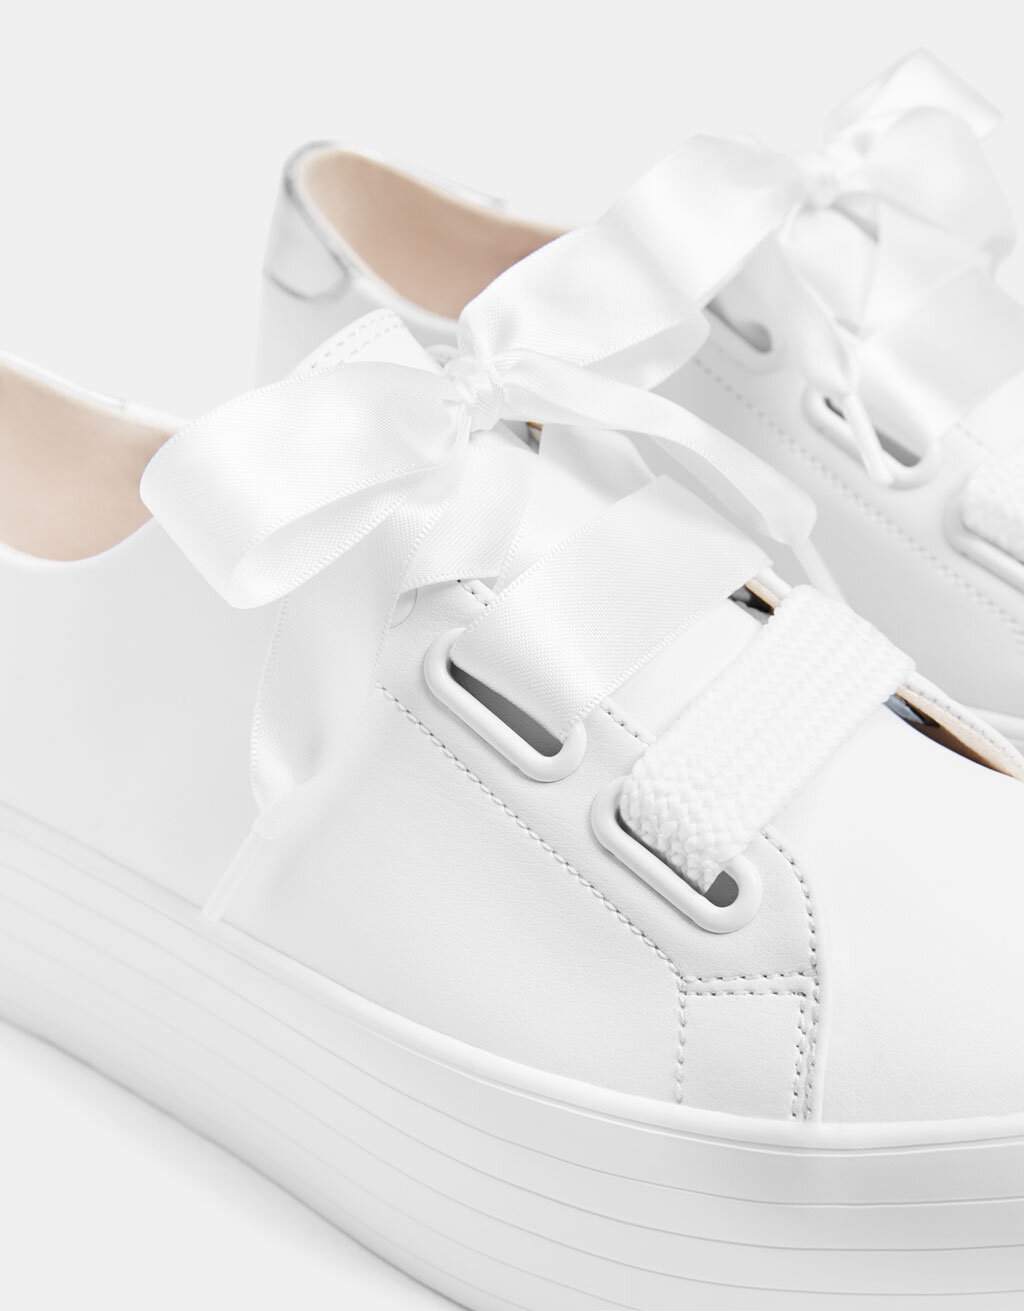 Bershka – Platform sneakers with XL laces